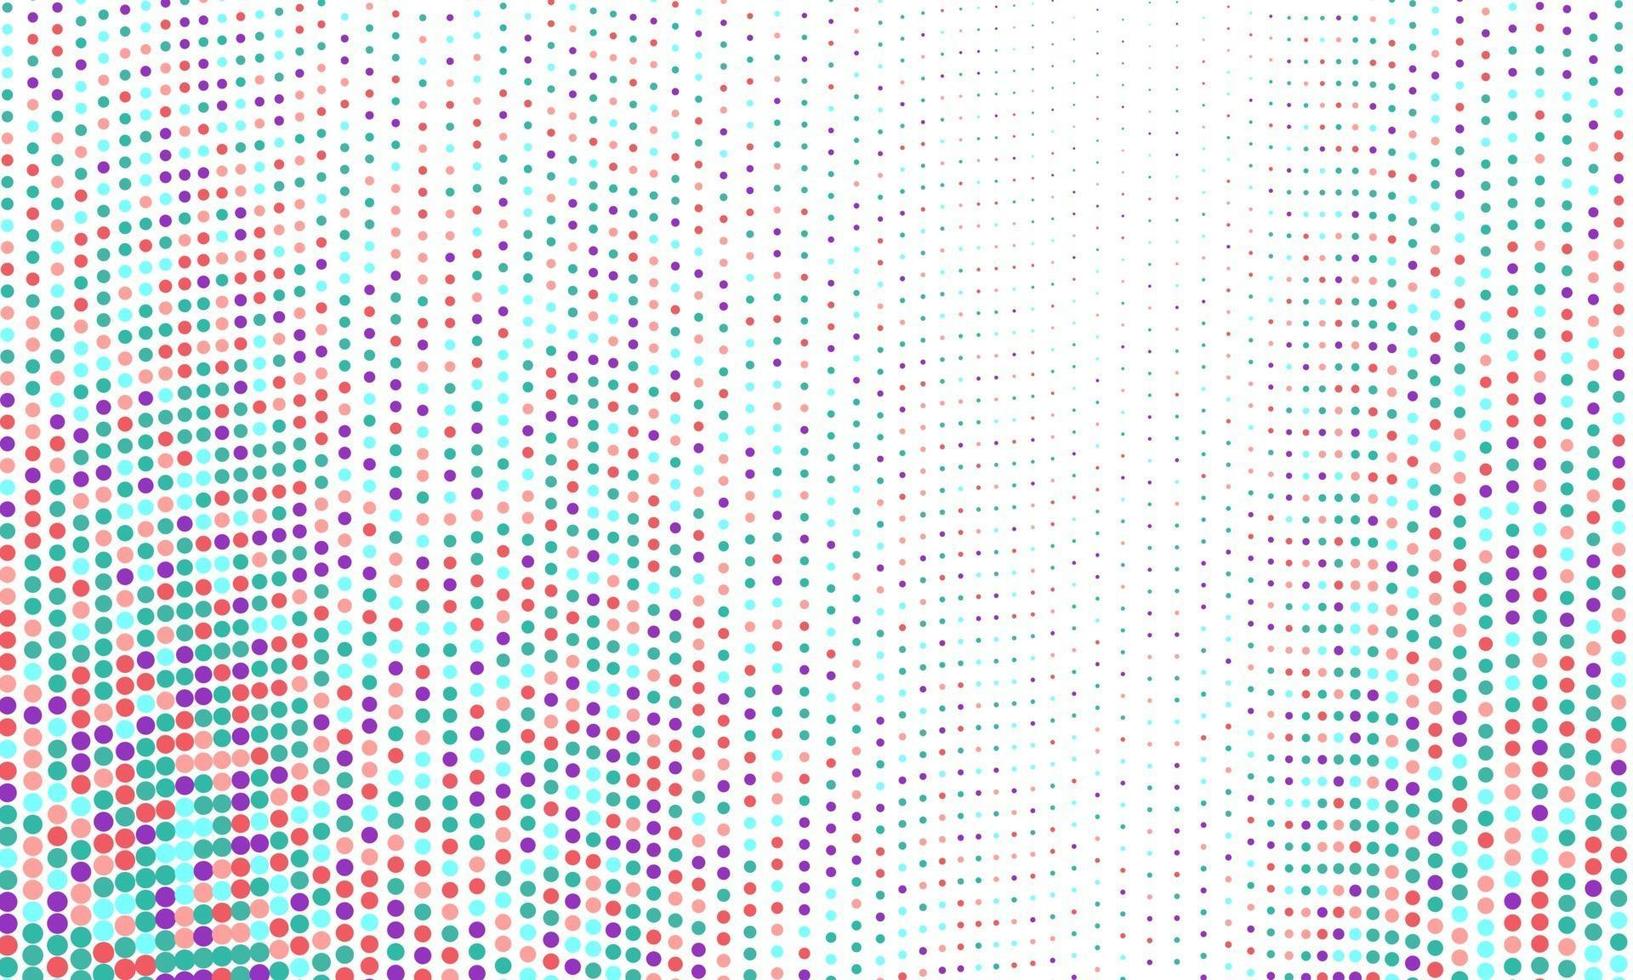 Colorful Wavy Halftone Pattern Background vector